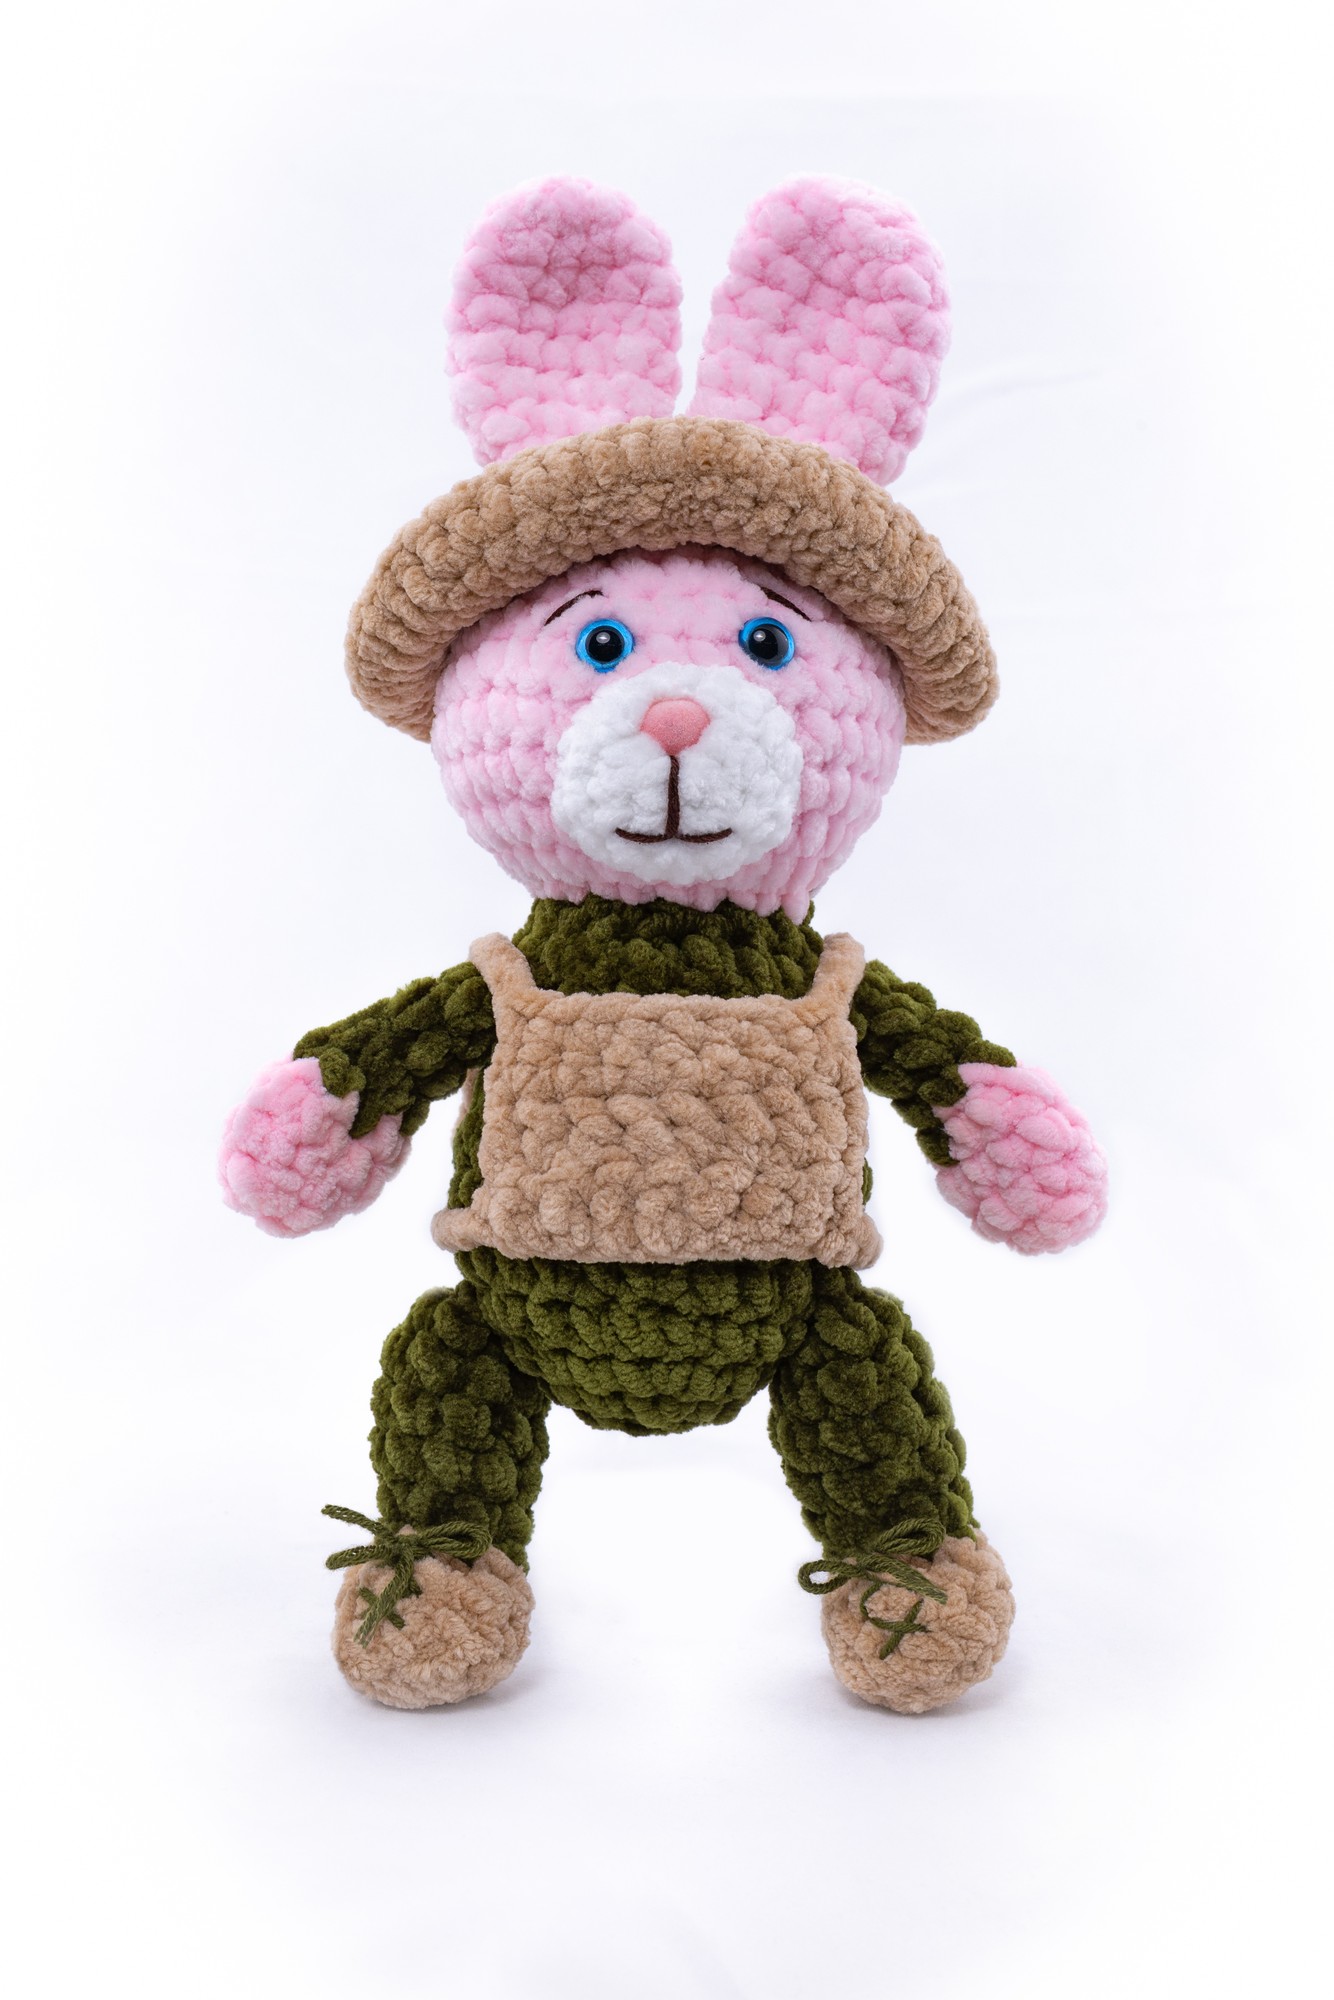 Knitted plush toy Bunny Boris from the Foreign Legion